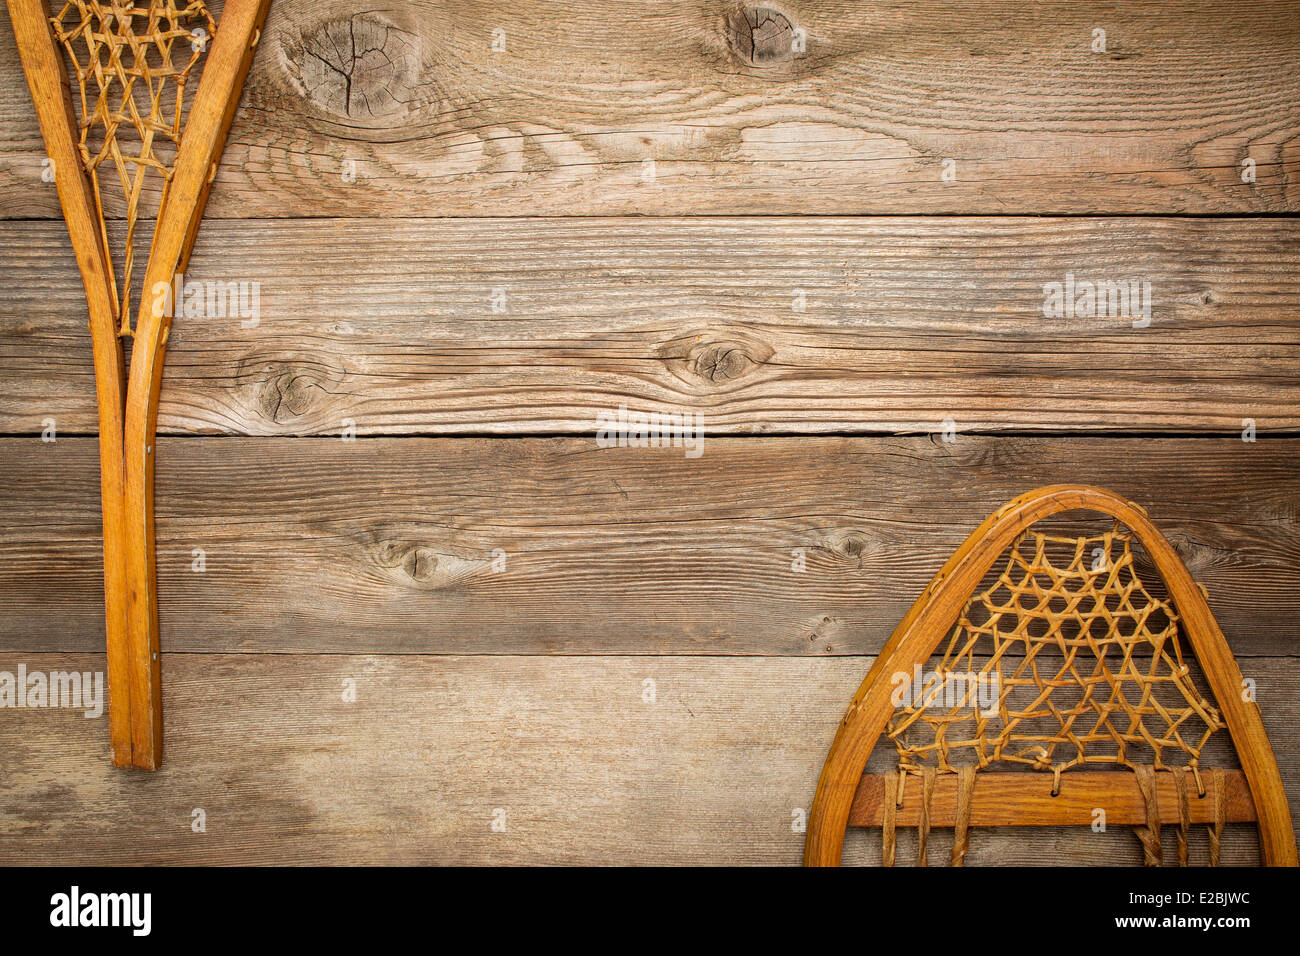 vintage Huron snowshoes against grained wood planks with a copy space Stock Photo